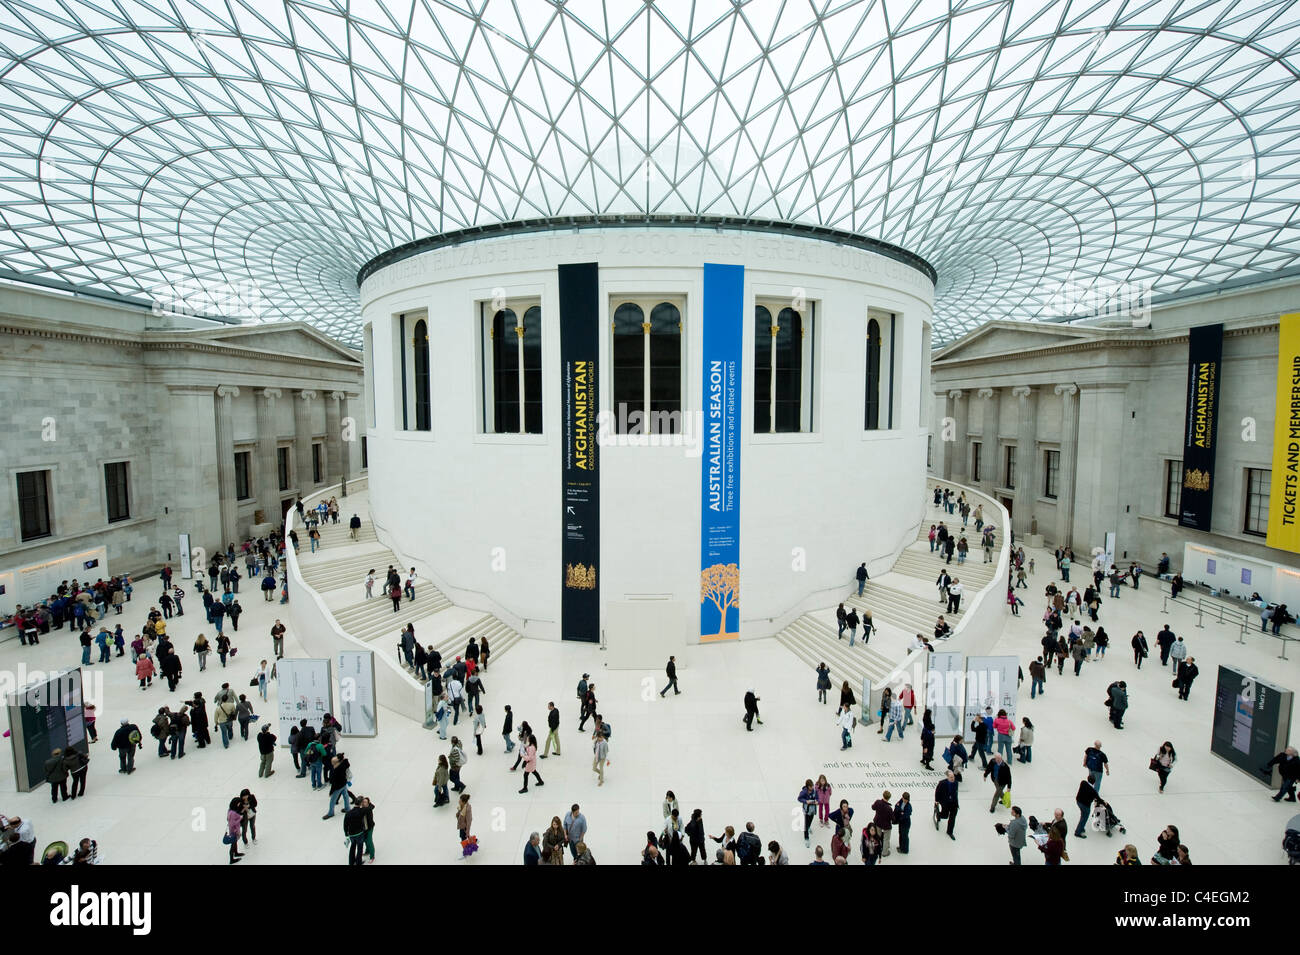 The Great Court of the British Museum located on Great Russell Street, London. Stock Photo